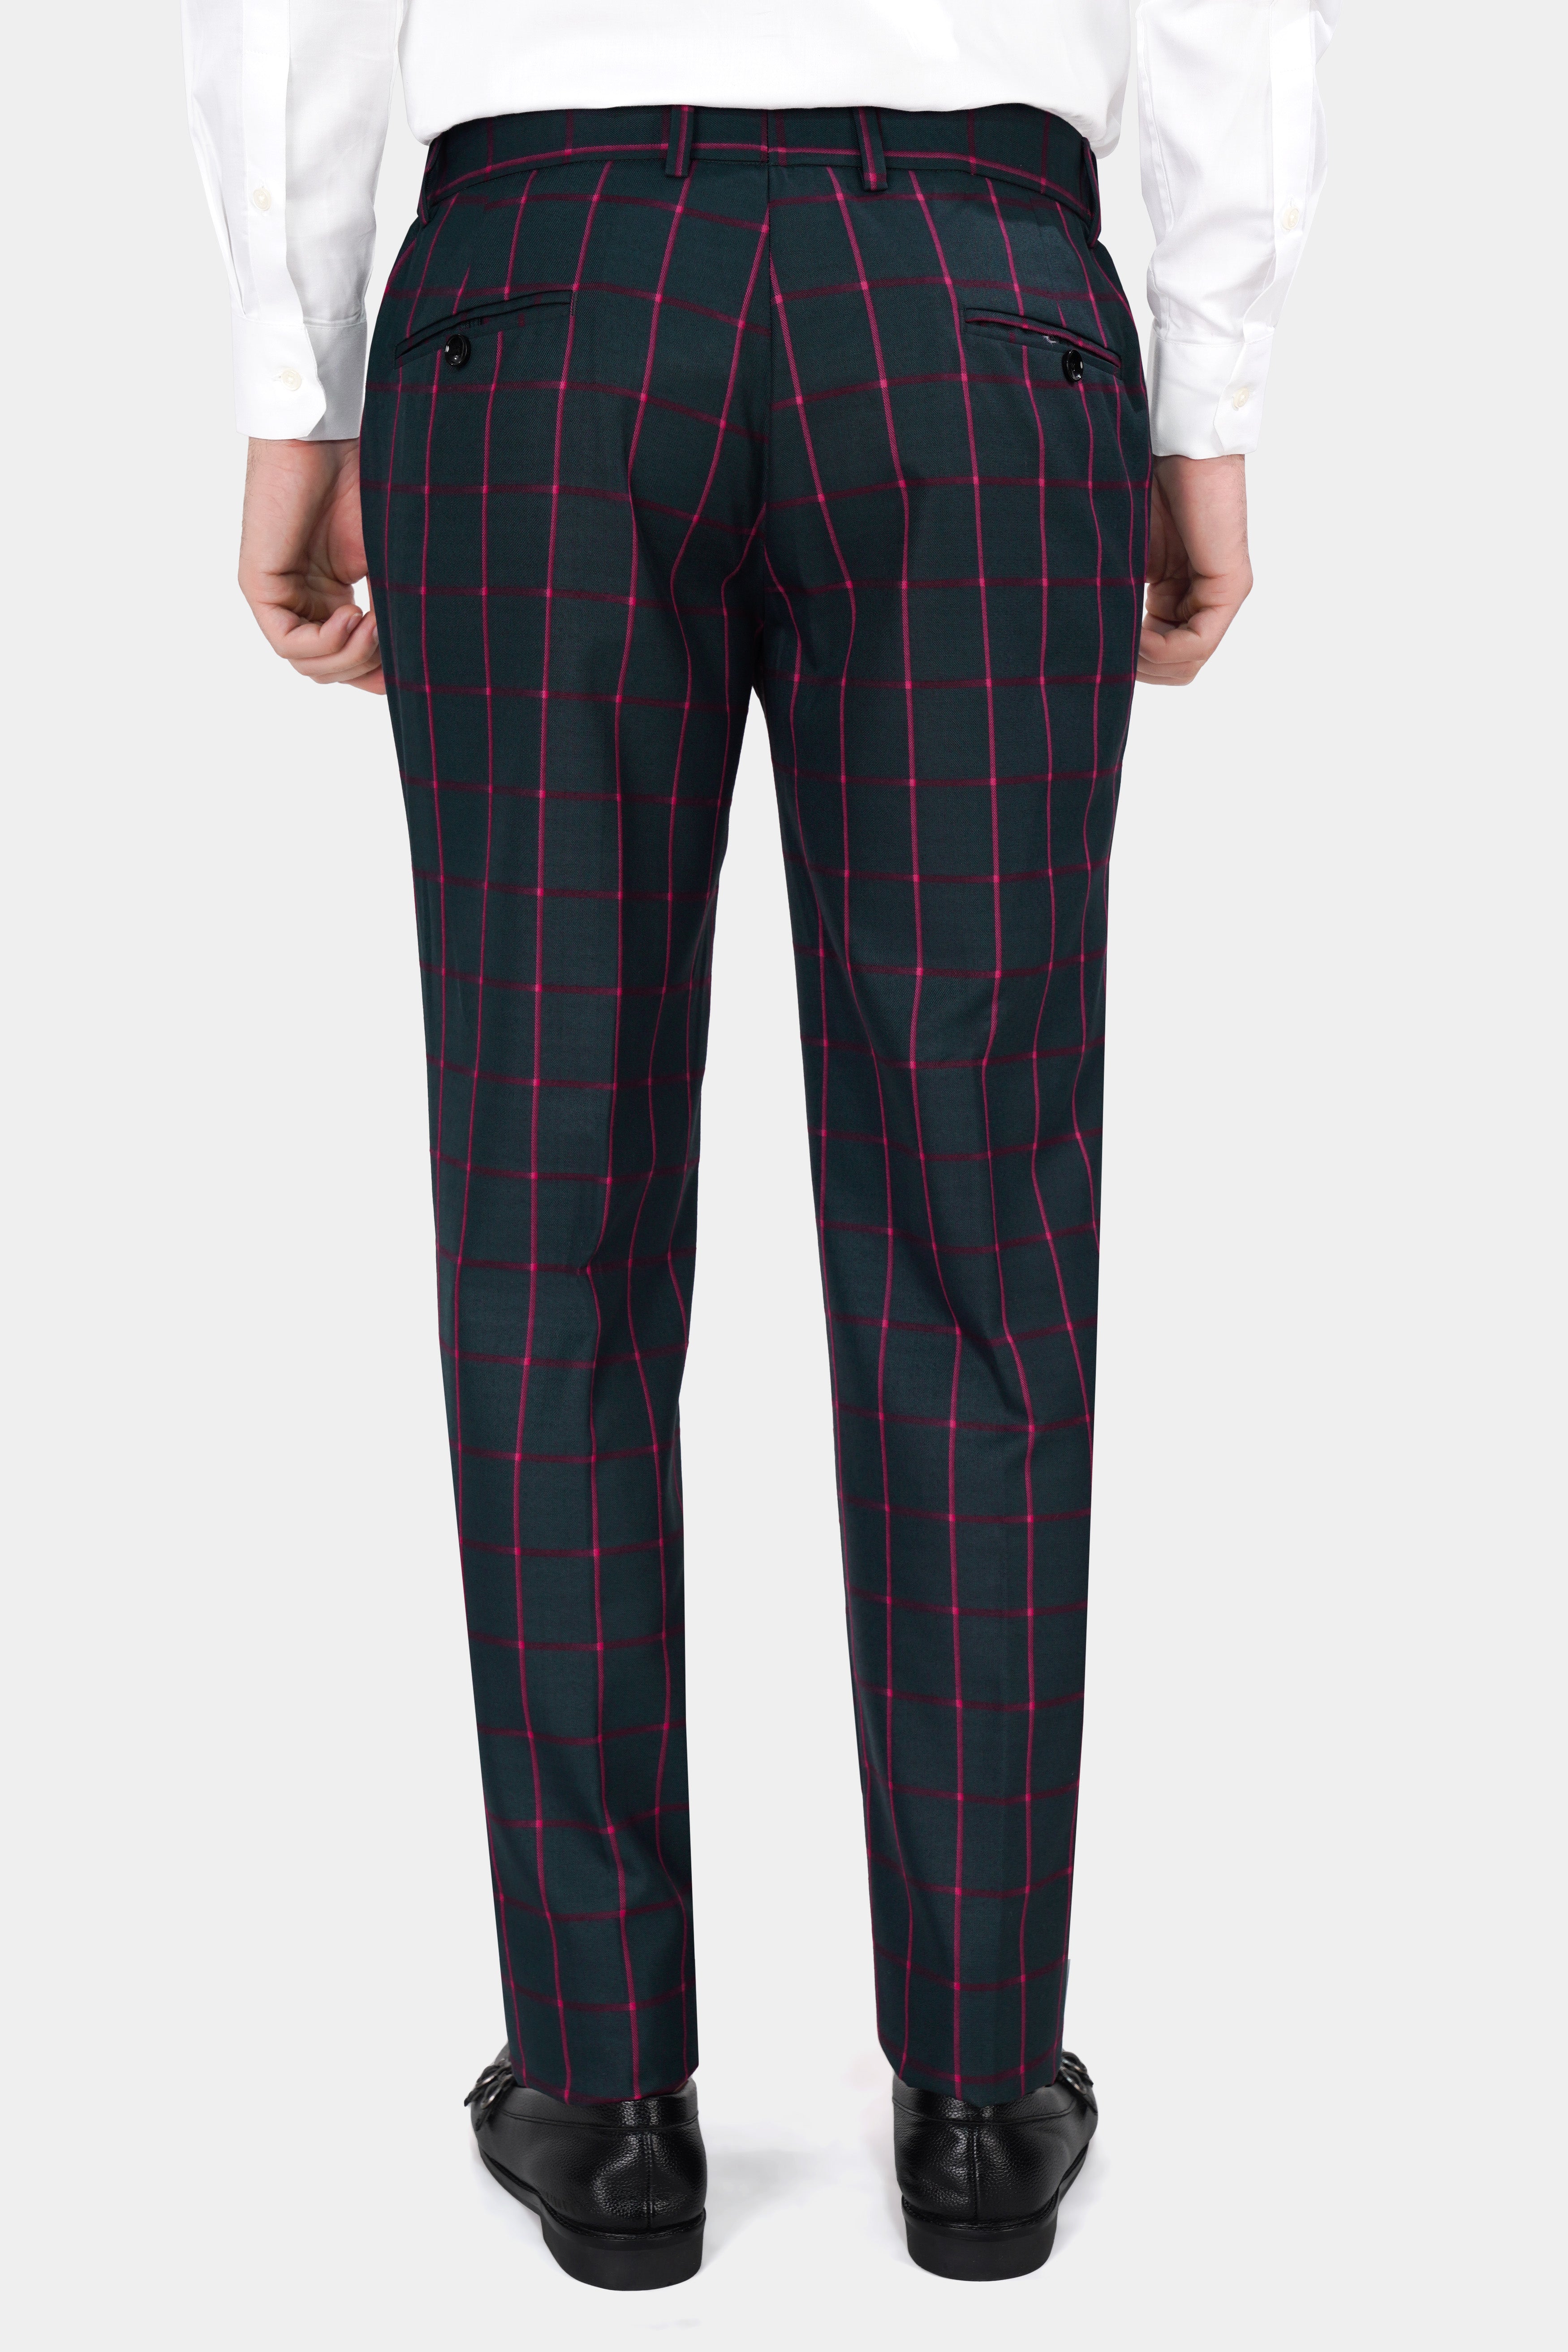 Outer Space Gray Checkered Wool Rich Pant T2843-SW-28, T2843-SW-30, T2843-SW-32, T2843-SW-34, T2843-SW-36, T2843-SW-38, T2843-SW-40, T2843-SW-42, T2843-SW-44